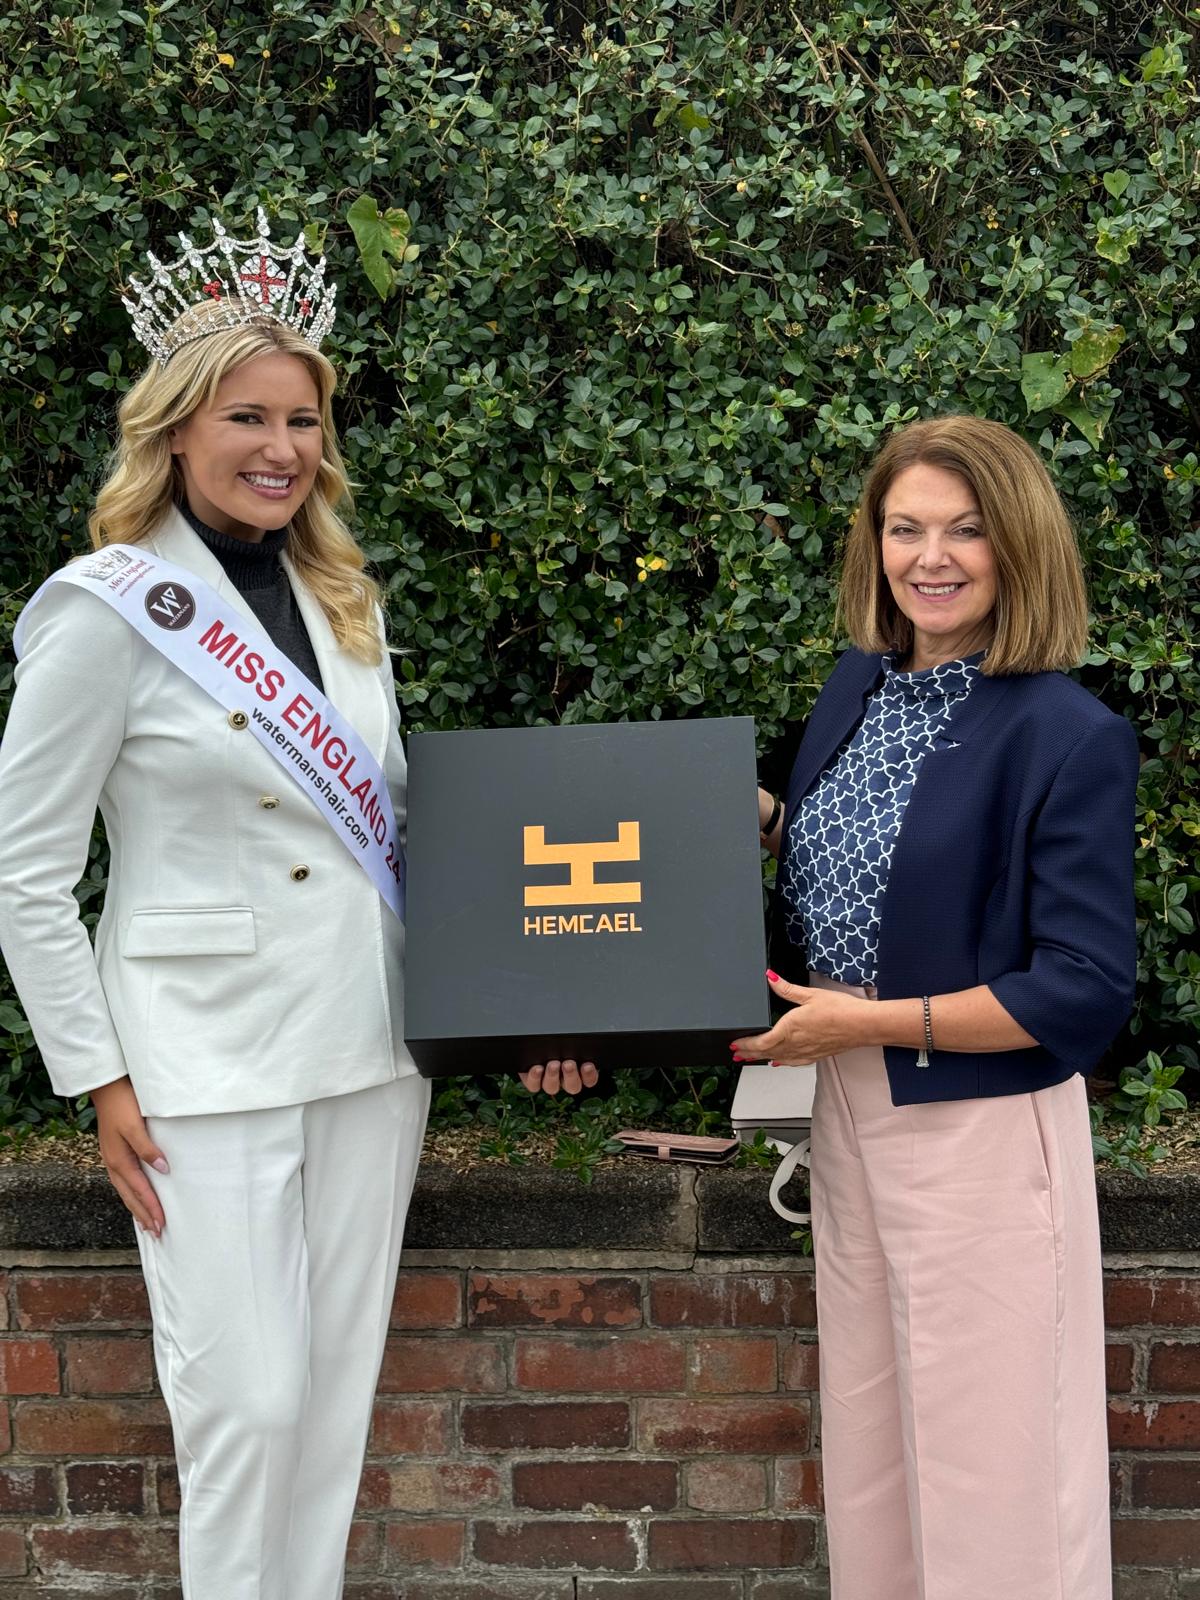 Miss England Milla Magee presented with a Hemcael Melime Tote Bag .